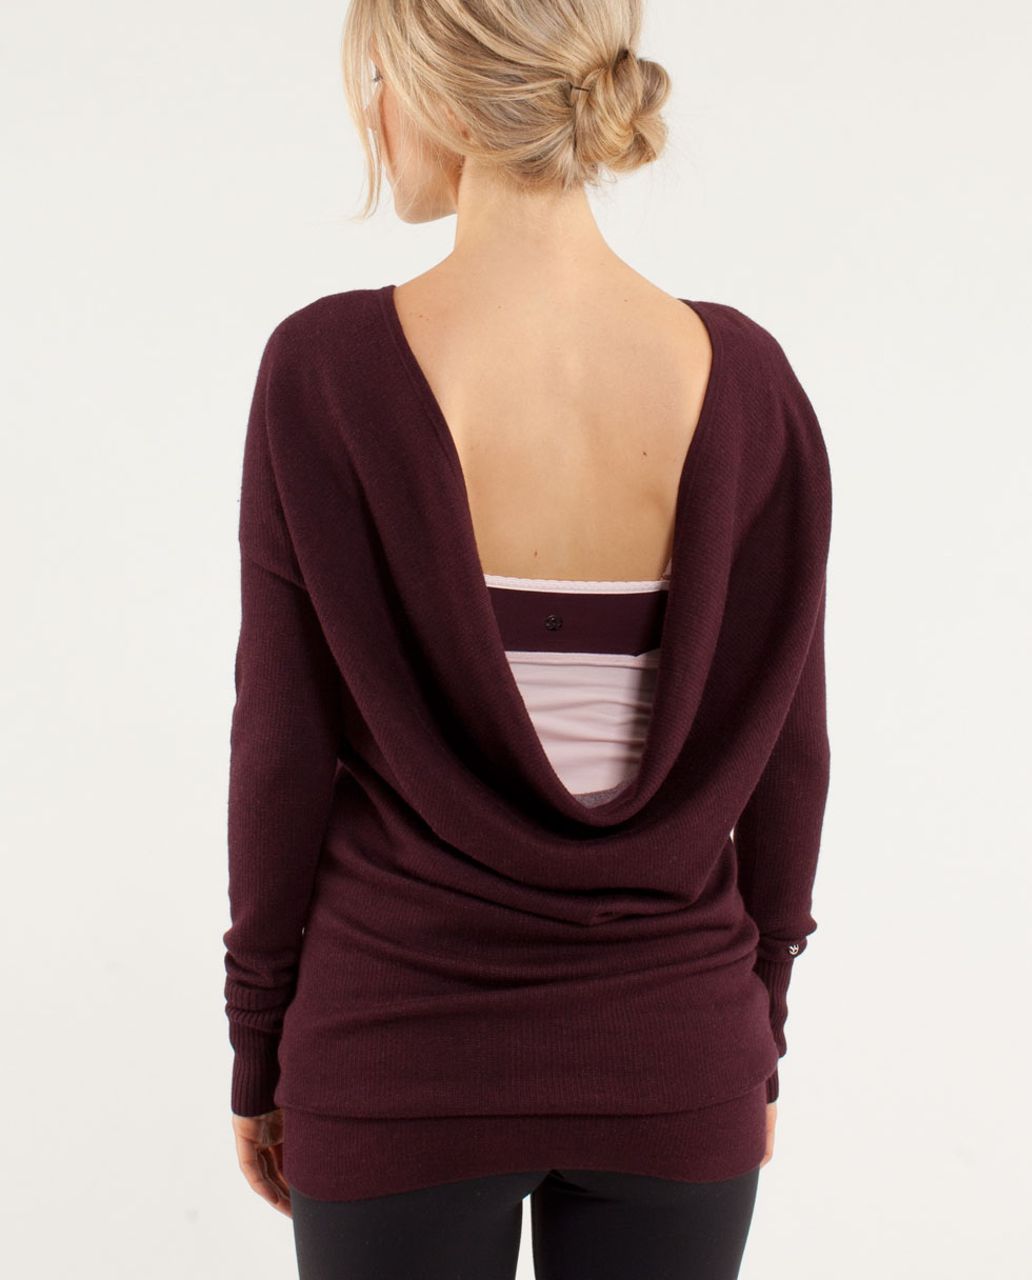 Lululemon Here for Serenity Sweater - Black / White / Silver Drop